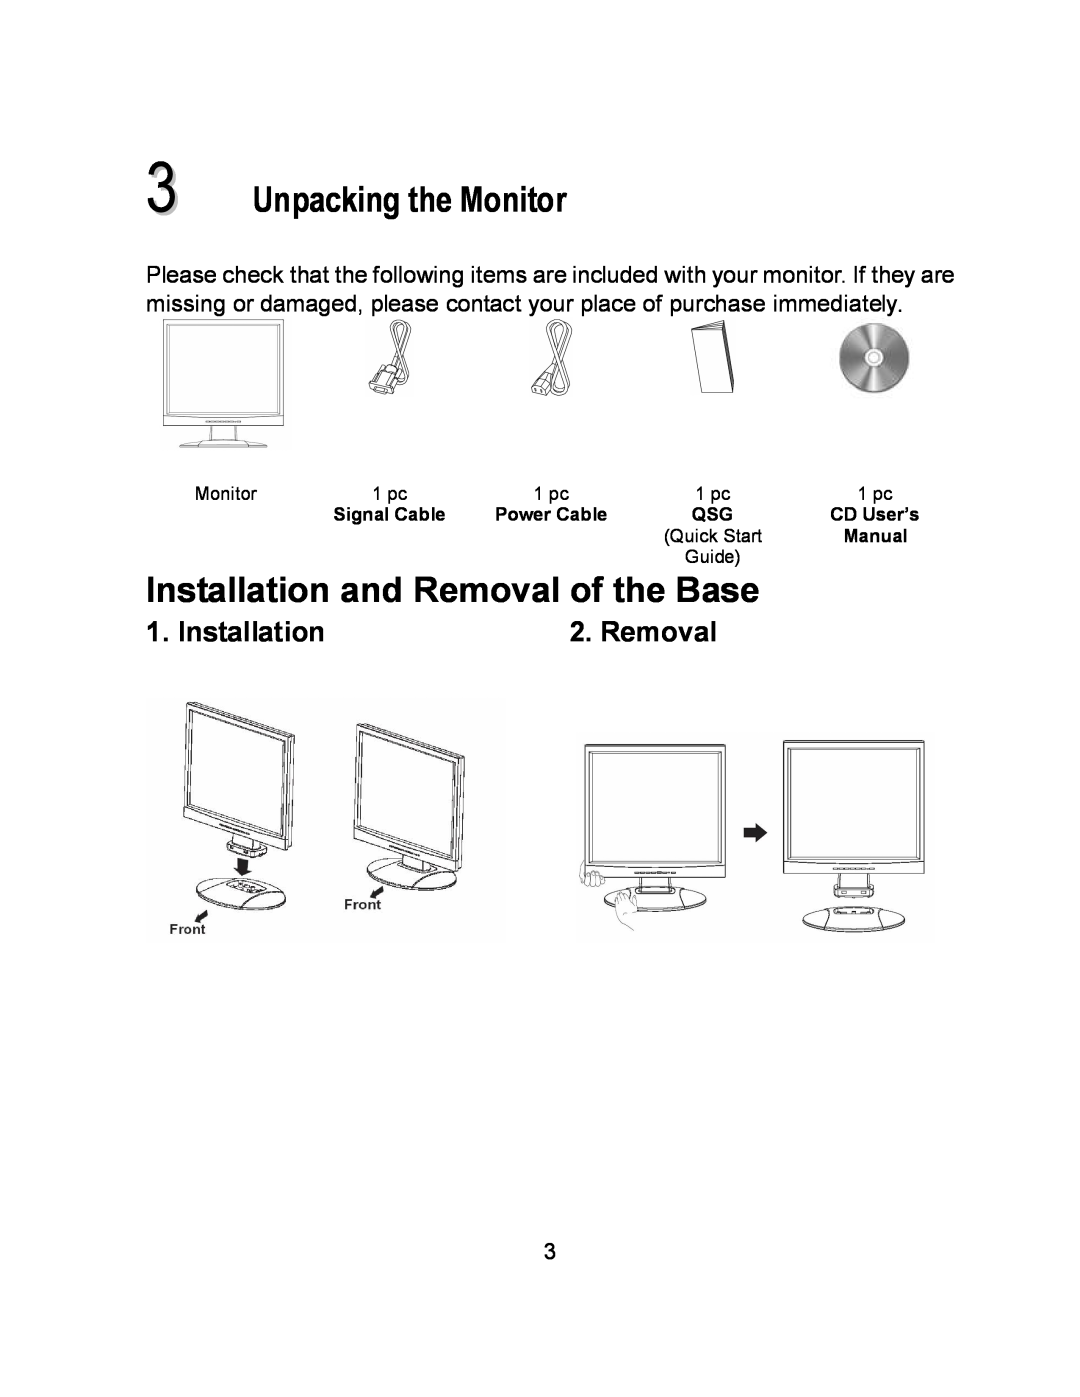 Envision Peripherals EN9410e user manual Unpacking the Monitor, Installation and Removal of the Base 